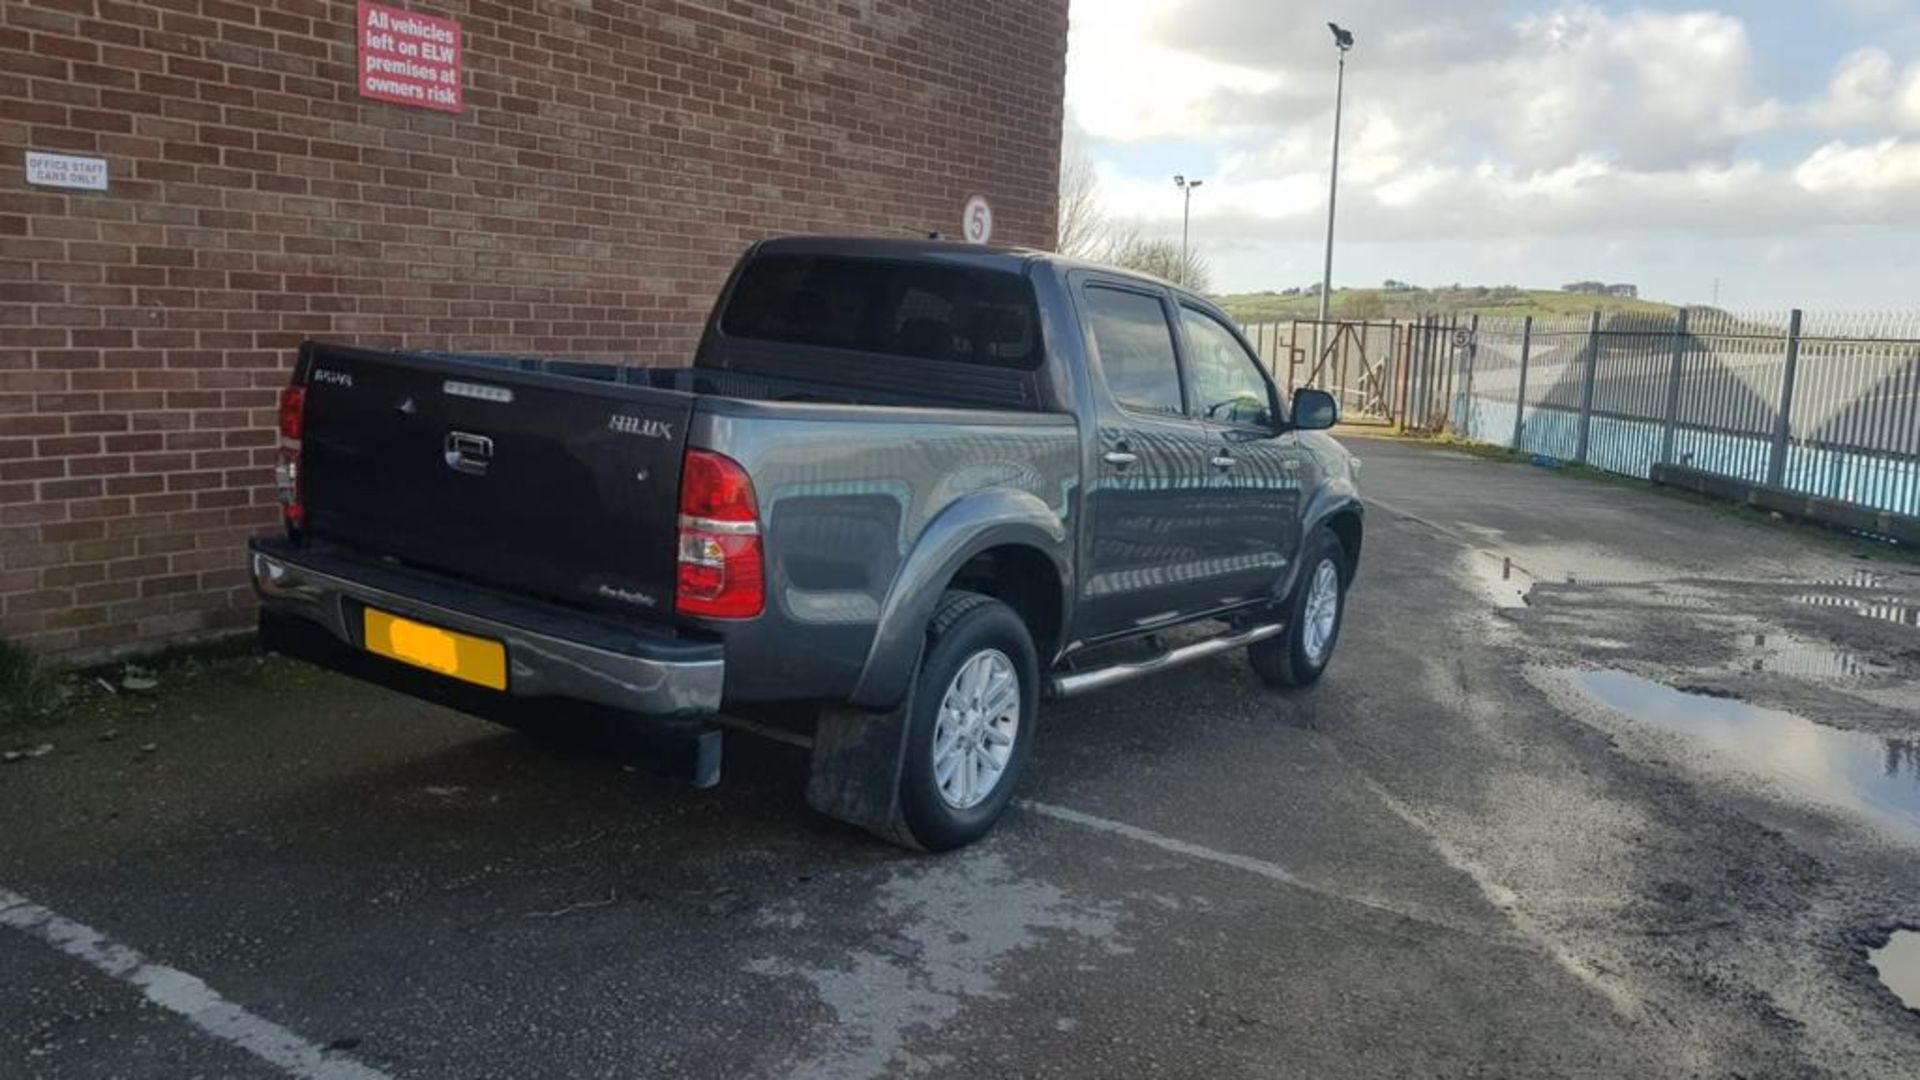 2015/64 REG TOYOTA HILUX INVINCIBLE D-4D 4X4 GREY DIESEL LIGHT UTILITY, SHOWING 1 FORMER KEEPER - Image 9 of 22